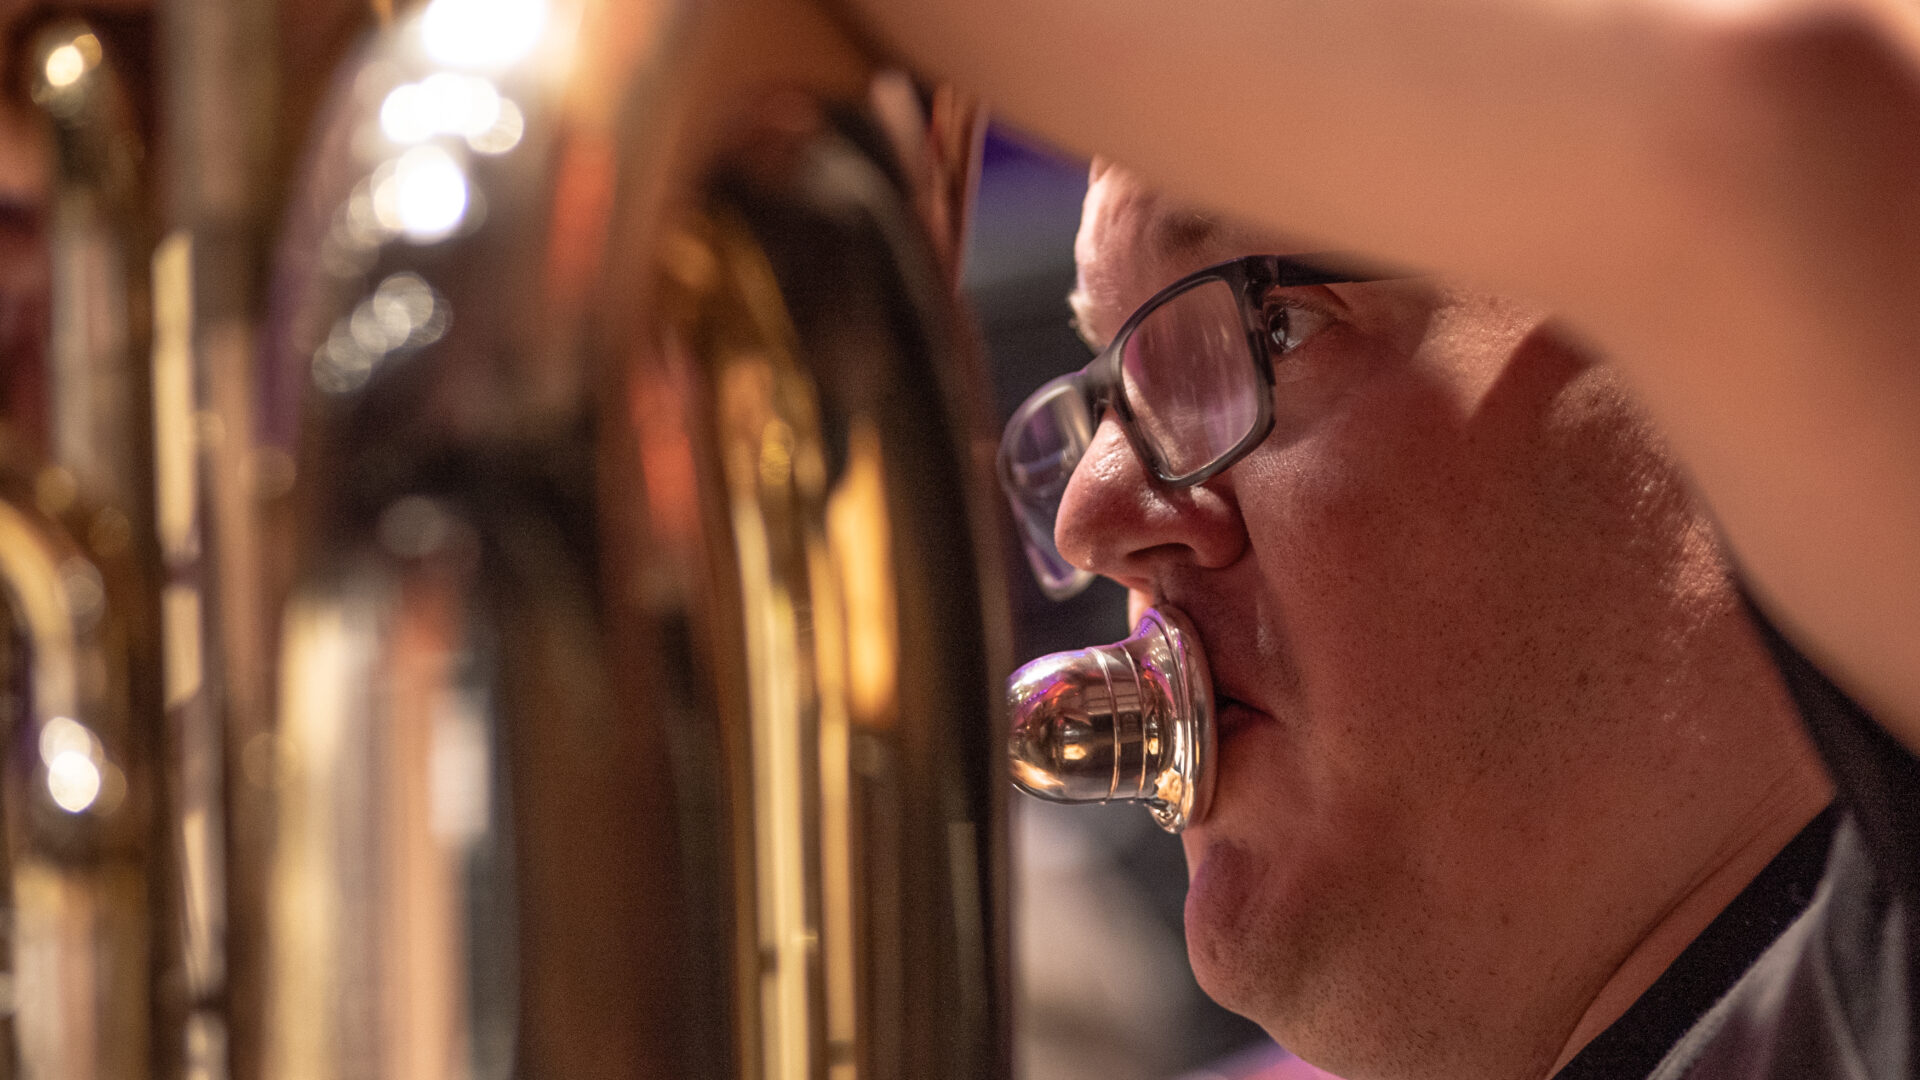 A talented BSO musician passionately playing a brass horn